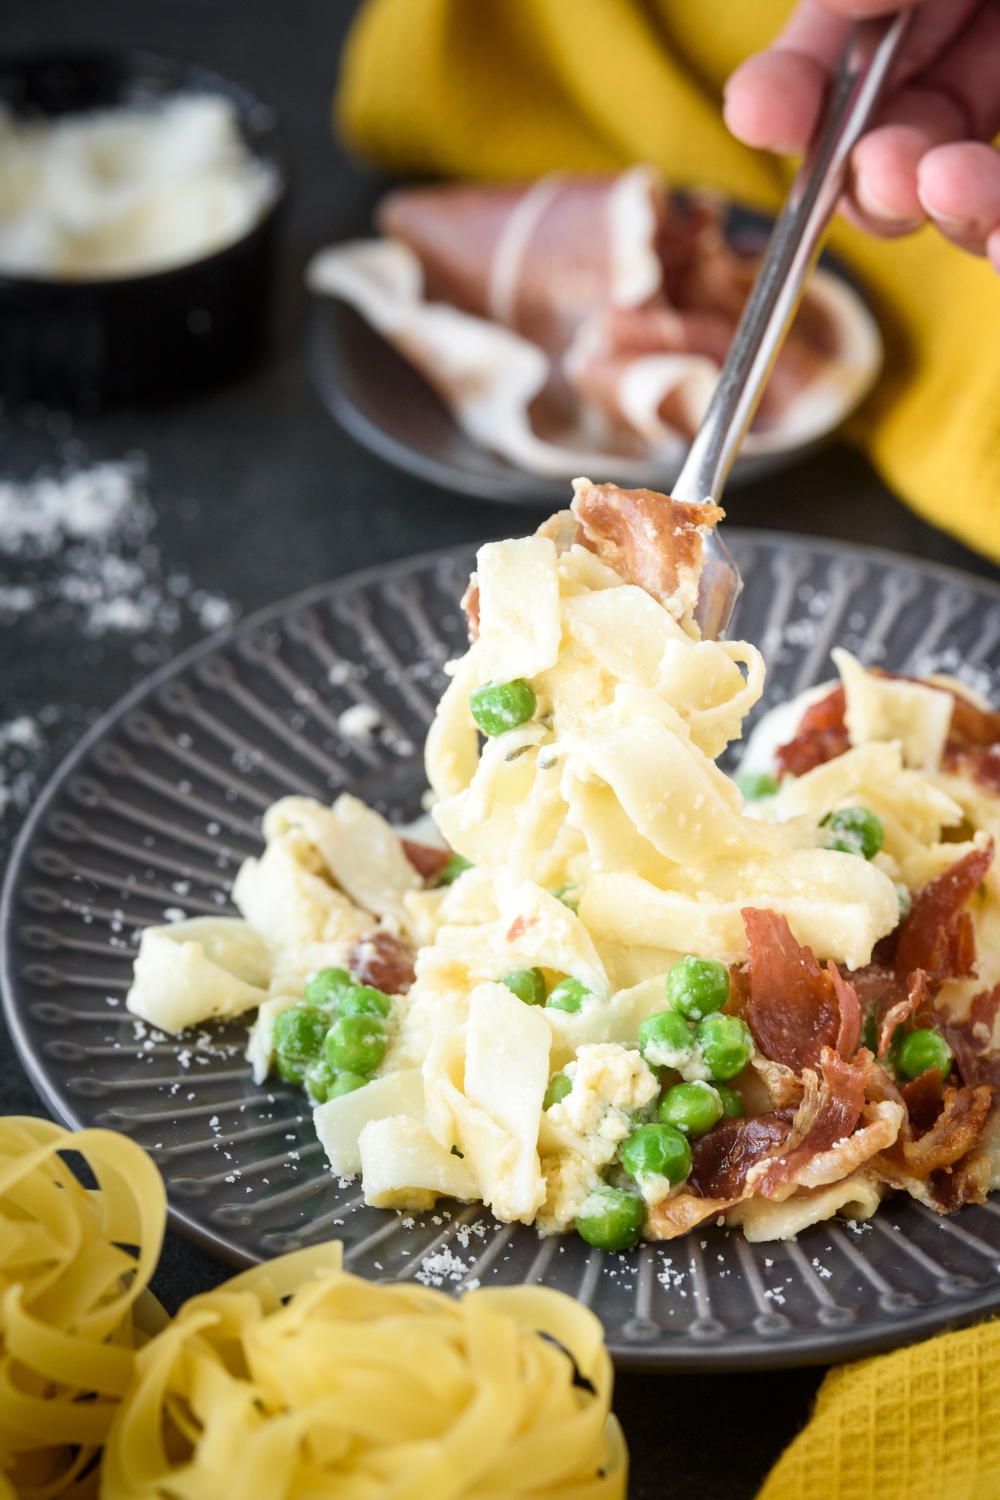 A fork scooping a bite of pasta covered in cream sauce from a plate filled with pasta, prosciutto, and peas.